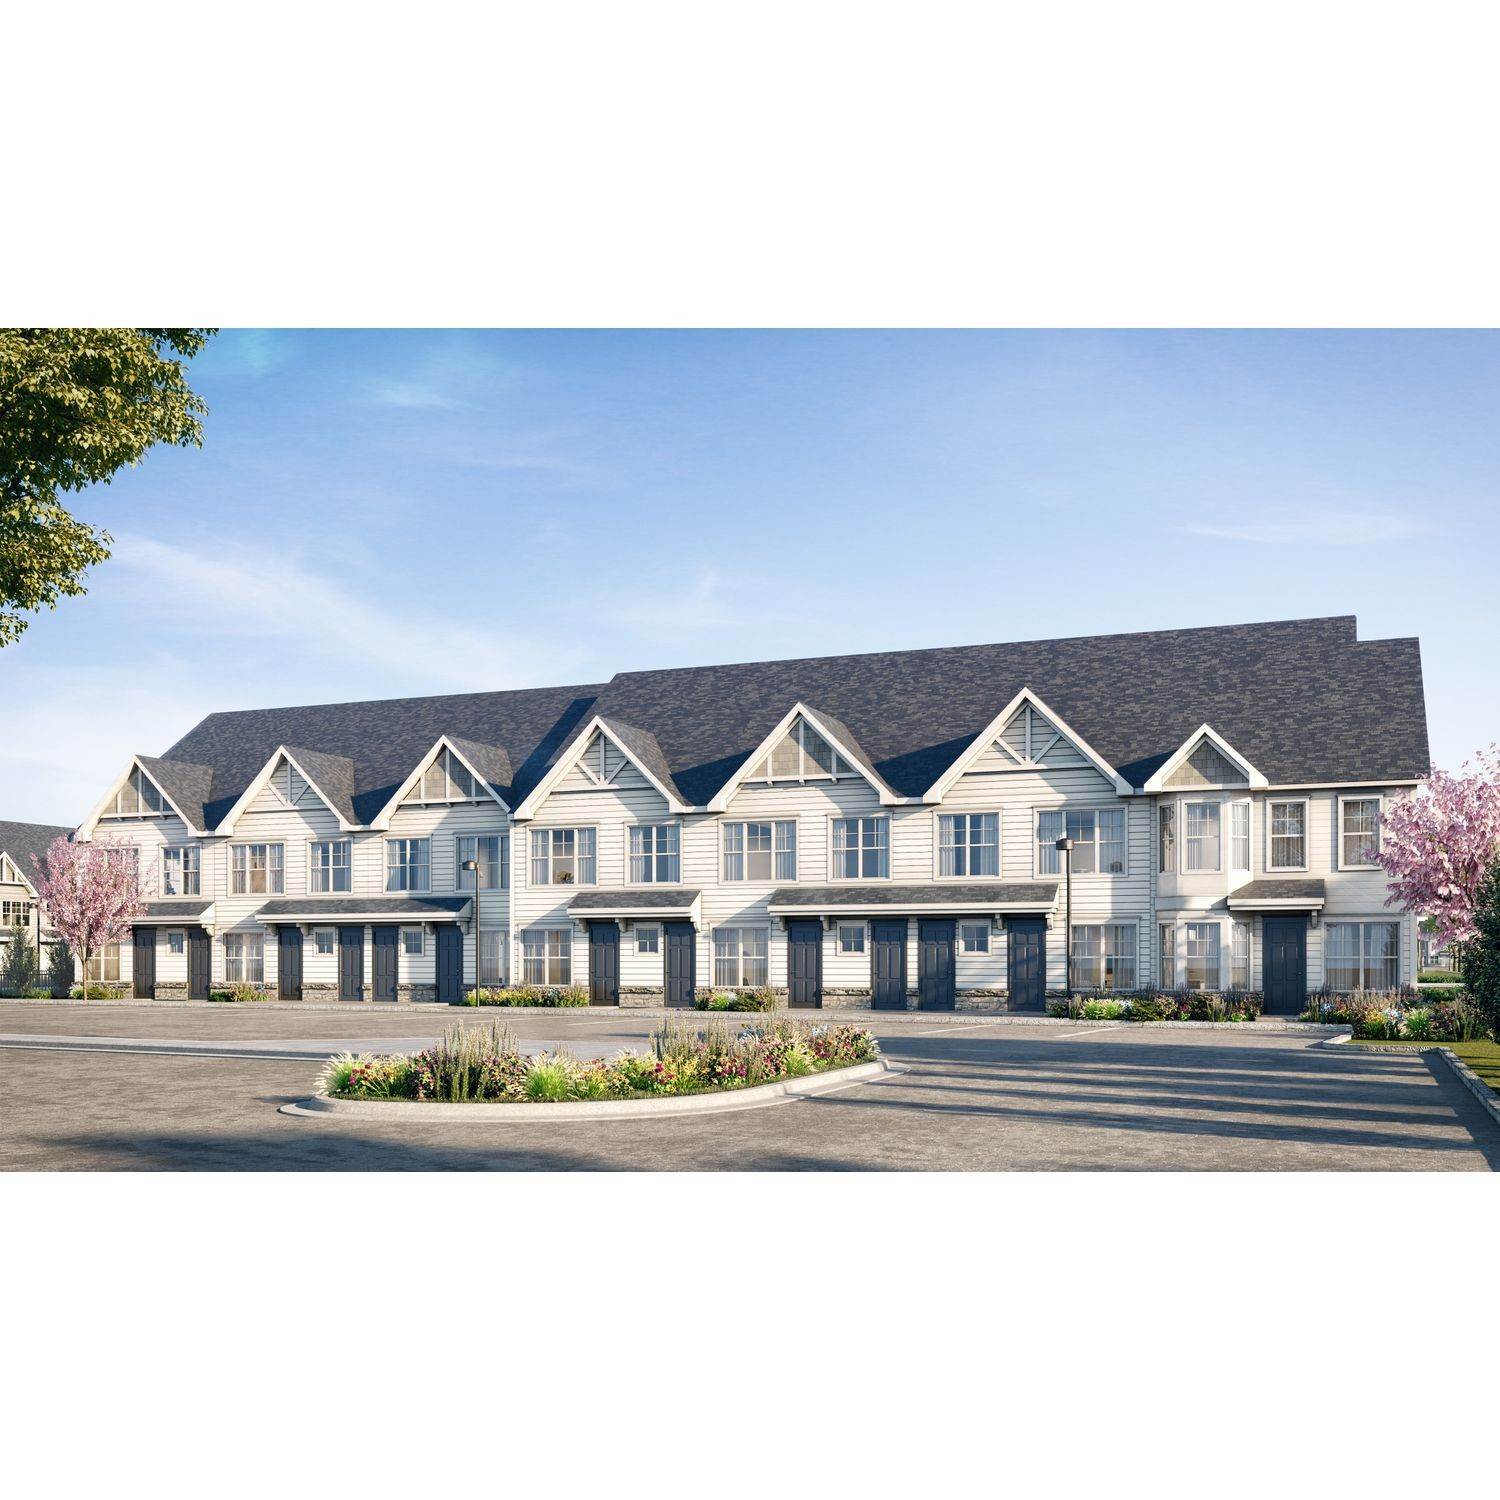 2. Meadowbrook Pointe East Meadow building at 123 Merrick Avenue, East Meadow, NY 11554